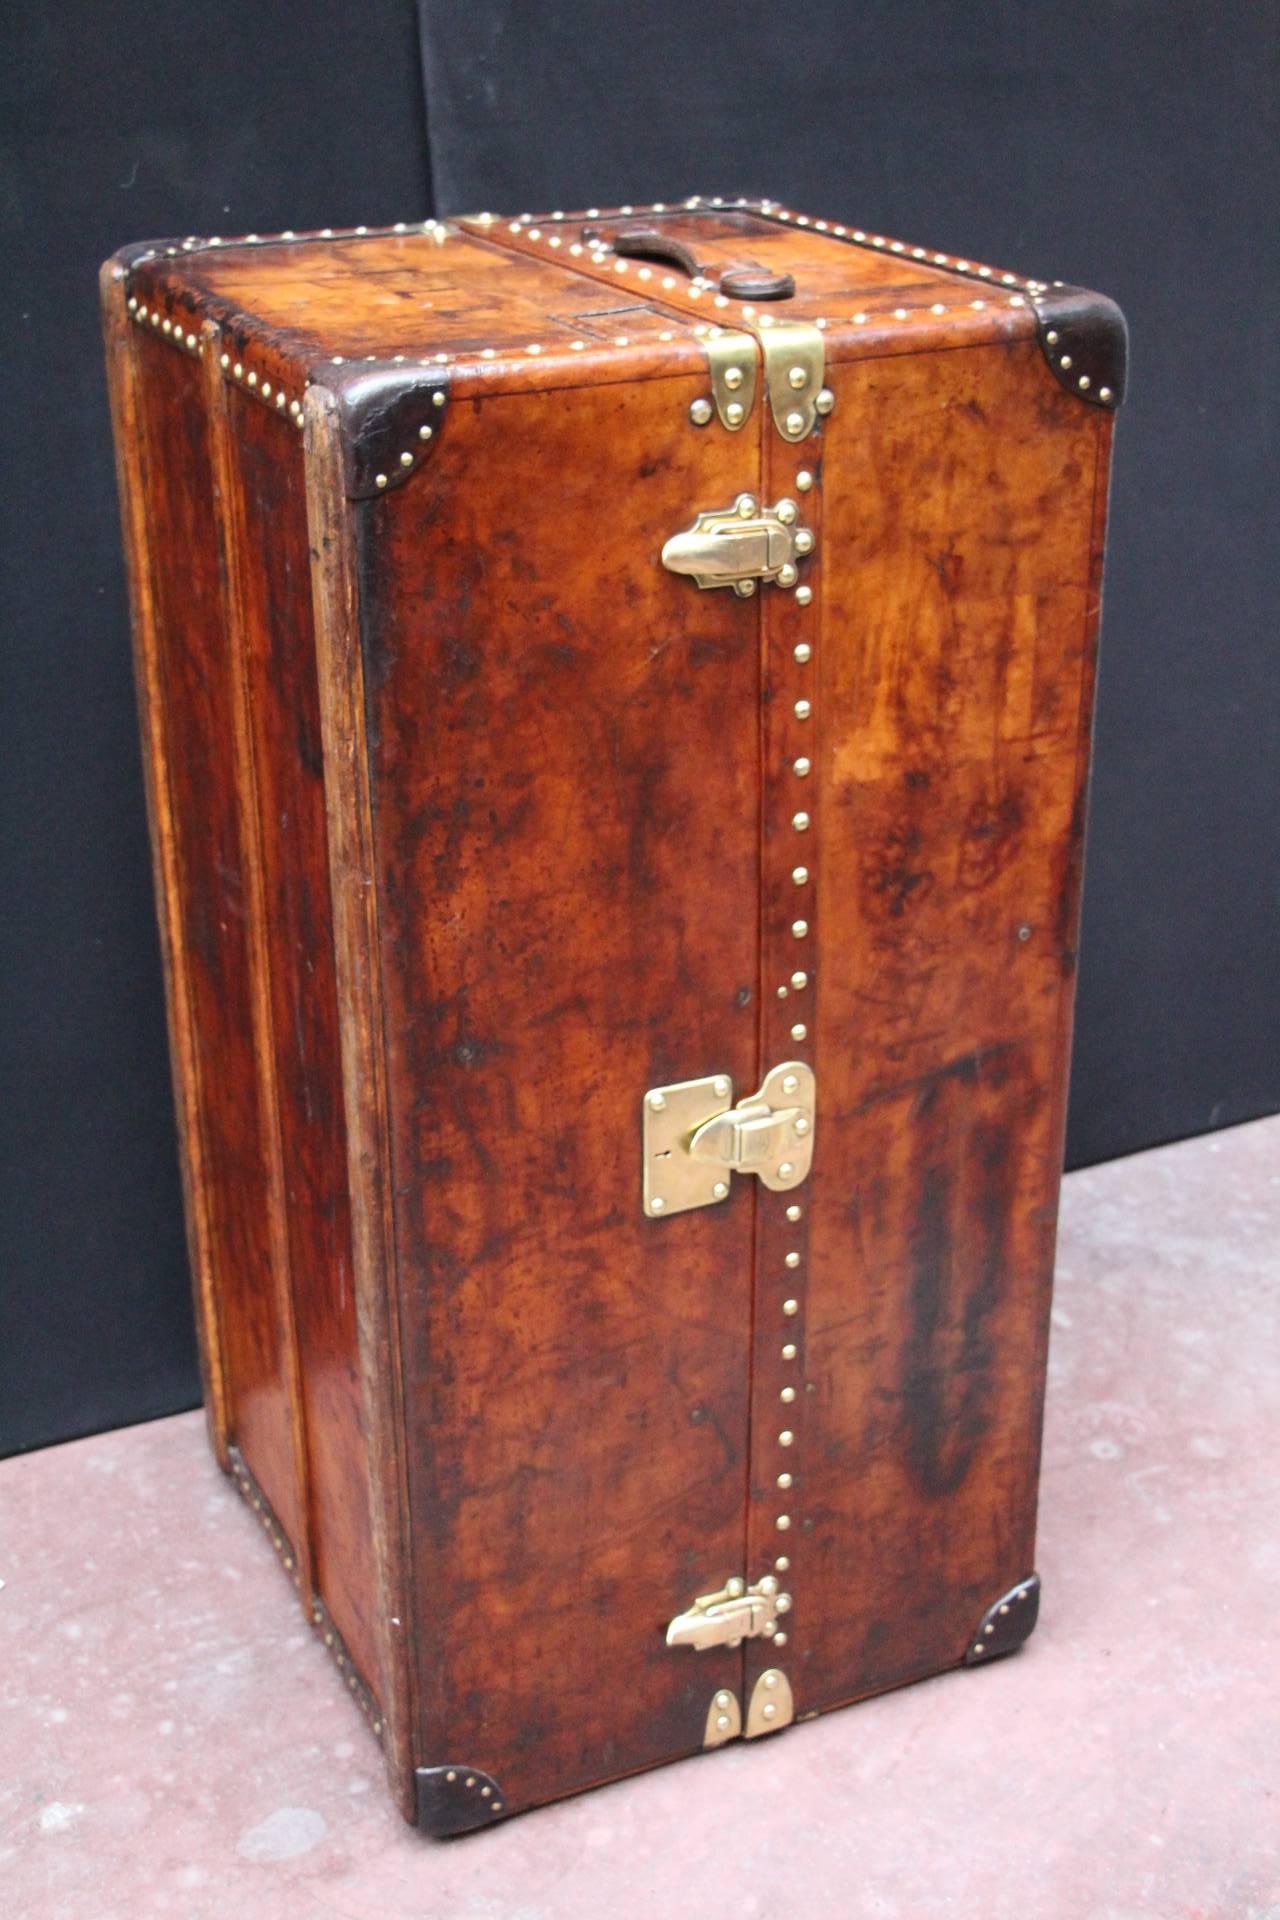 This very unusual Louis Vuitton trunk features a rich and very warm brown leather shaded patina. All stamped Louis Vuitton brass studs, lock and latches. Original leather handle.
Once open, it reveals two folding hanging sections with many LV